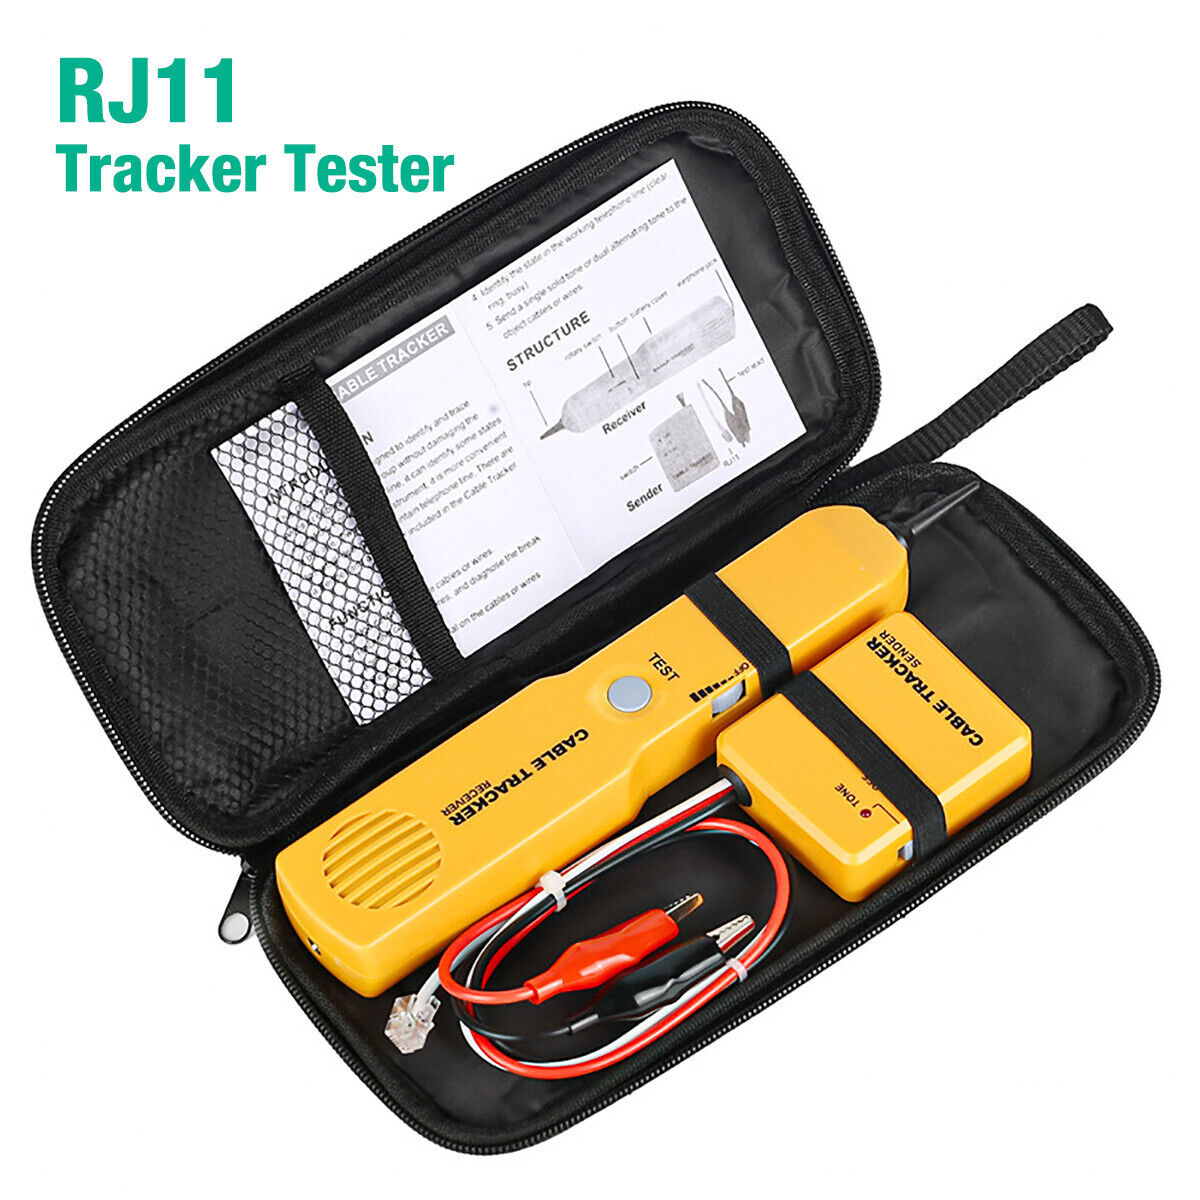 Network RJ11 Line Finder Cable Tracker Tester Toner Electric Wire Tracer Pouch Ombar Network RJ11 Tracker Tester - фотография #11